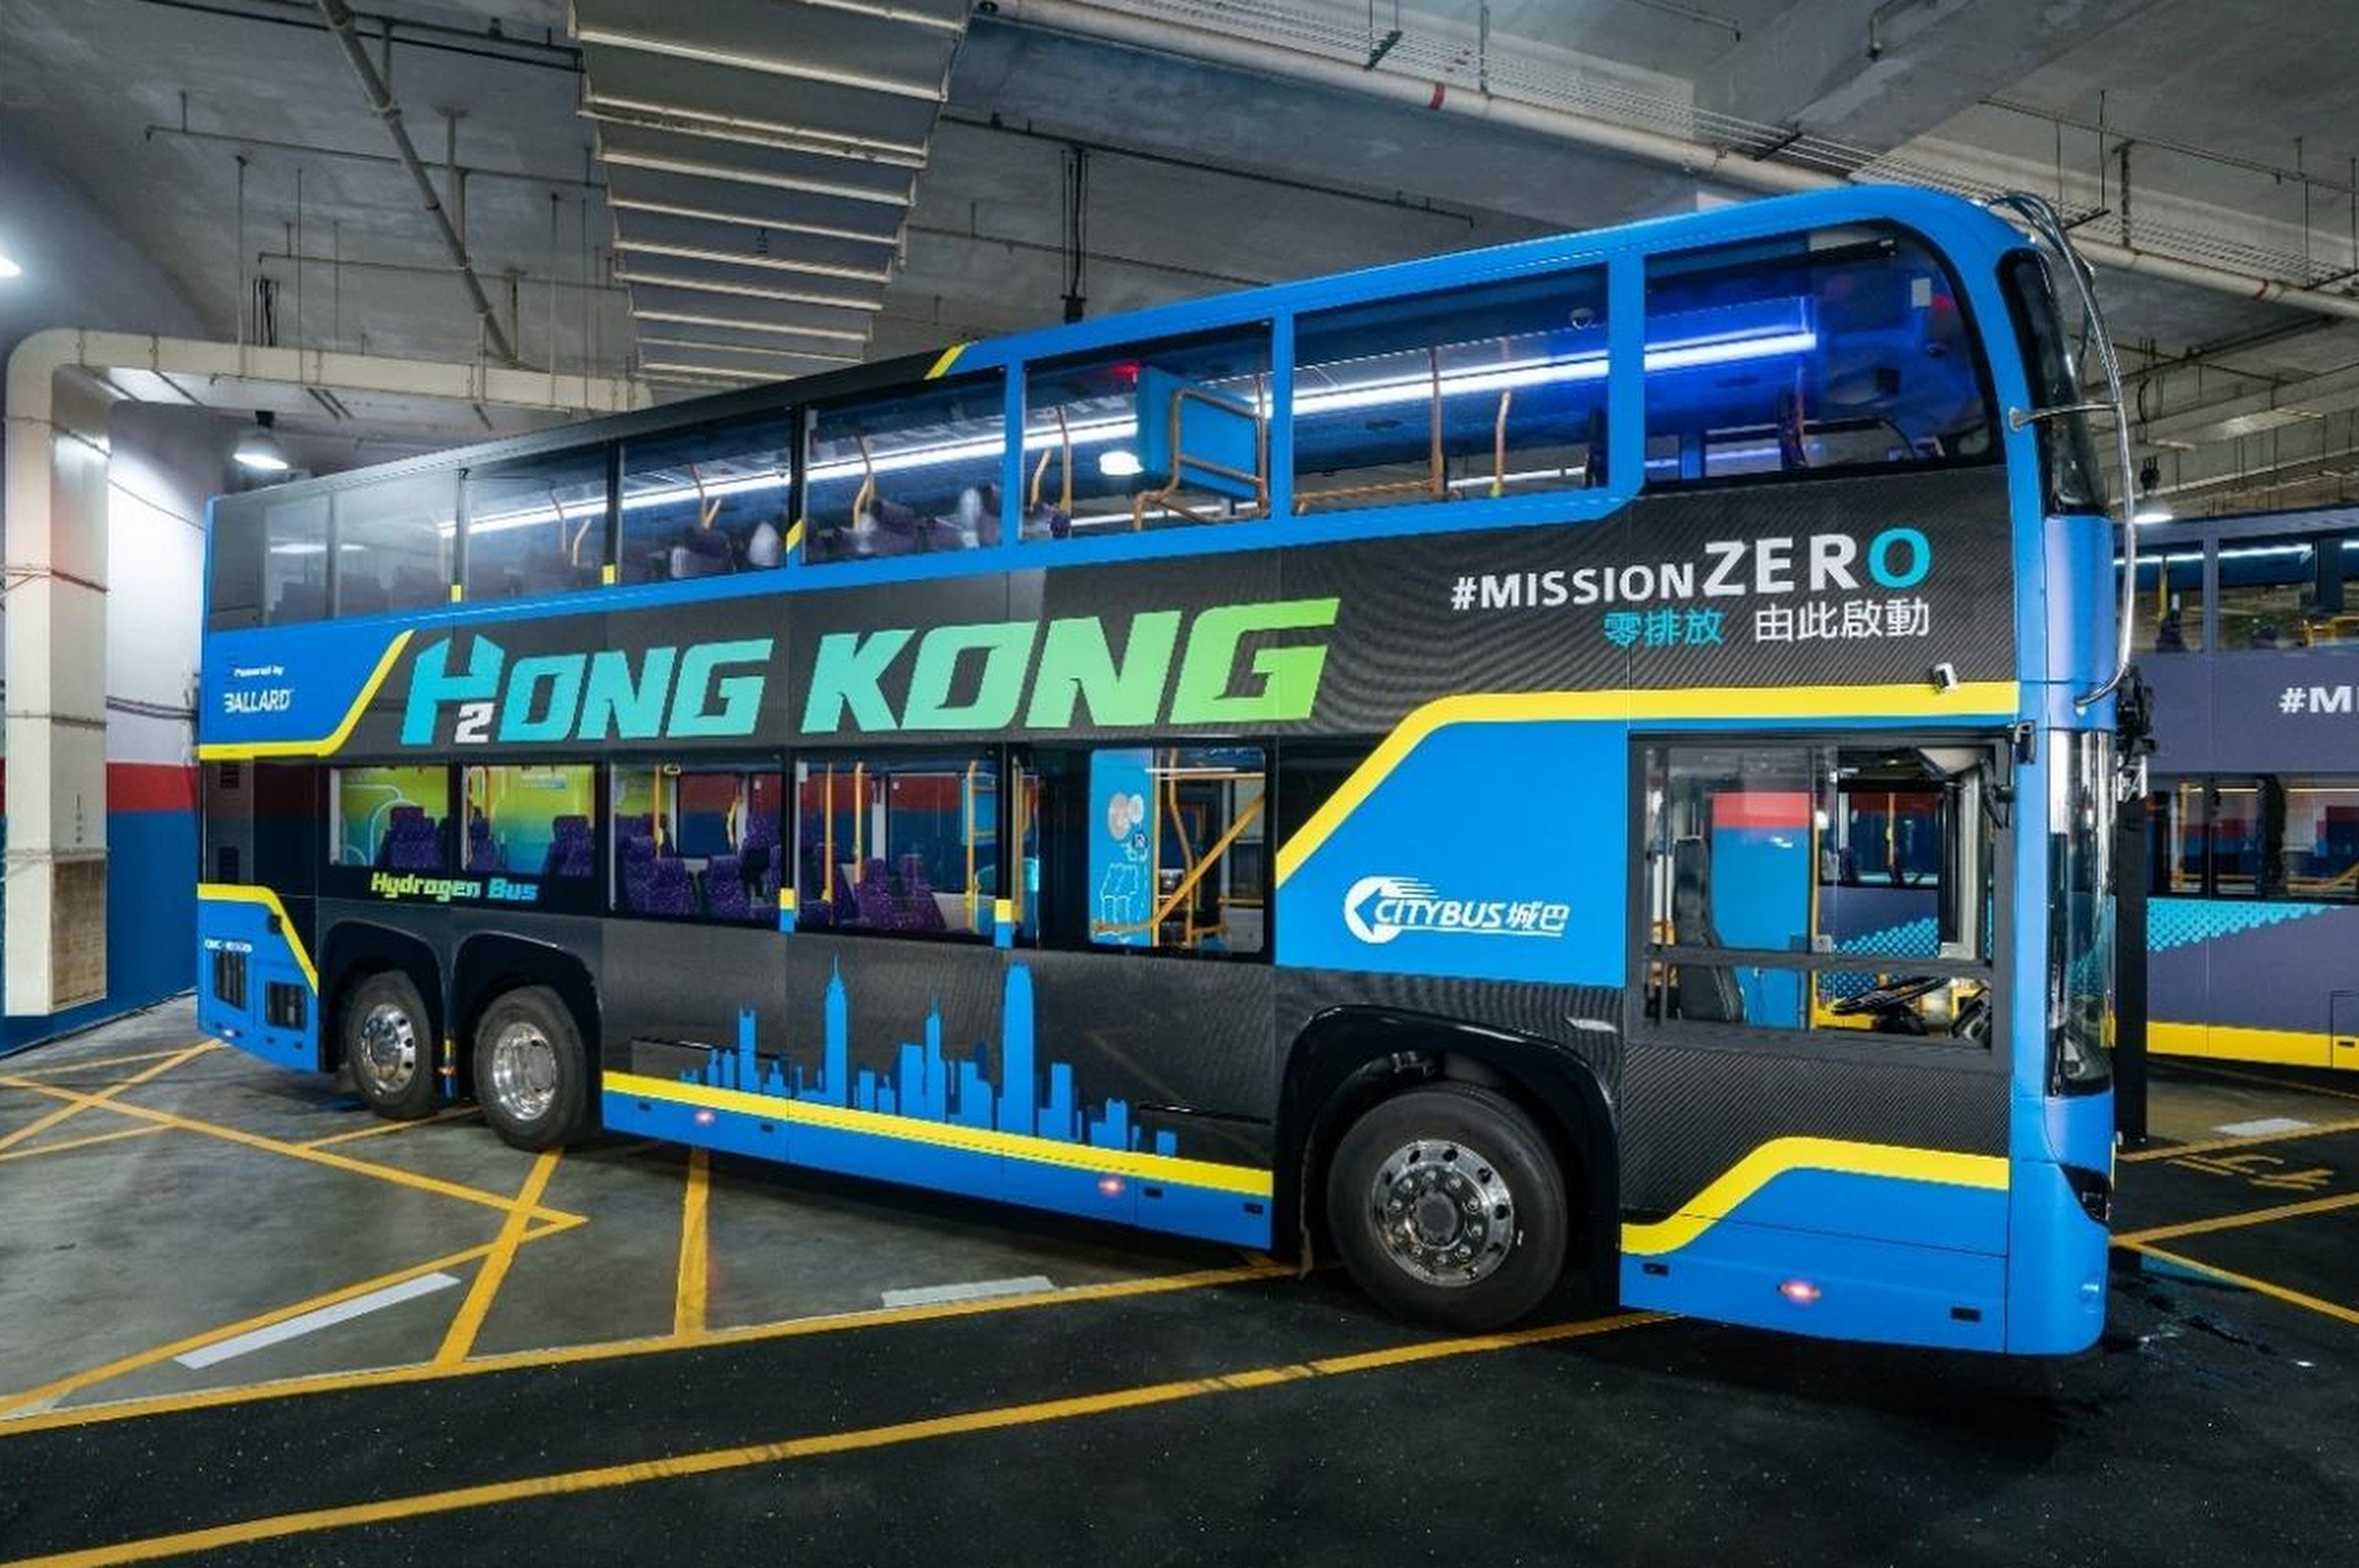 Citybus is set to introduce no fewer than five hydrogen buses in the coming year, according to a statement issued on Thursday. Photo: Handout